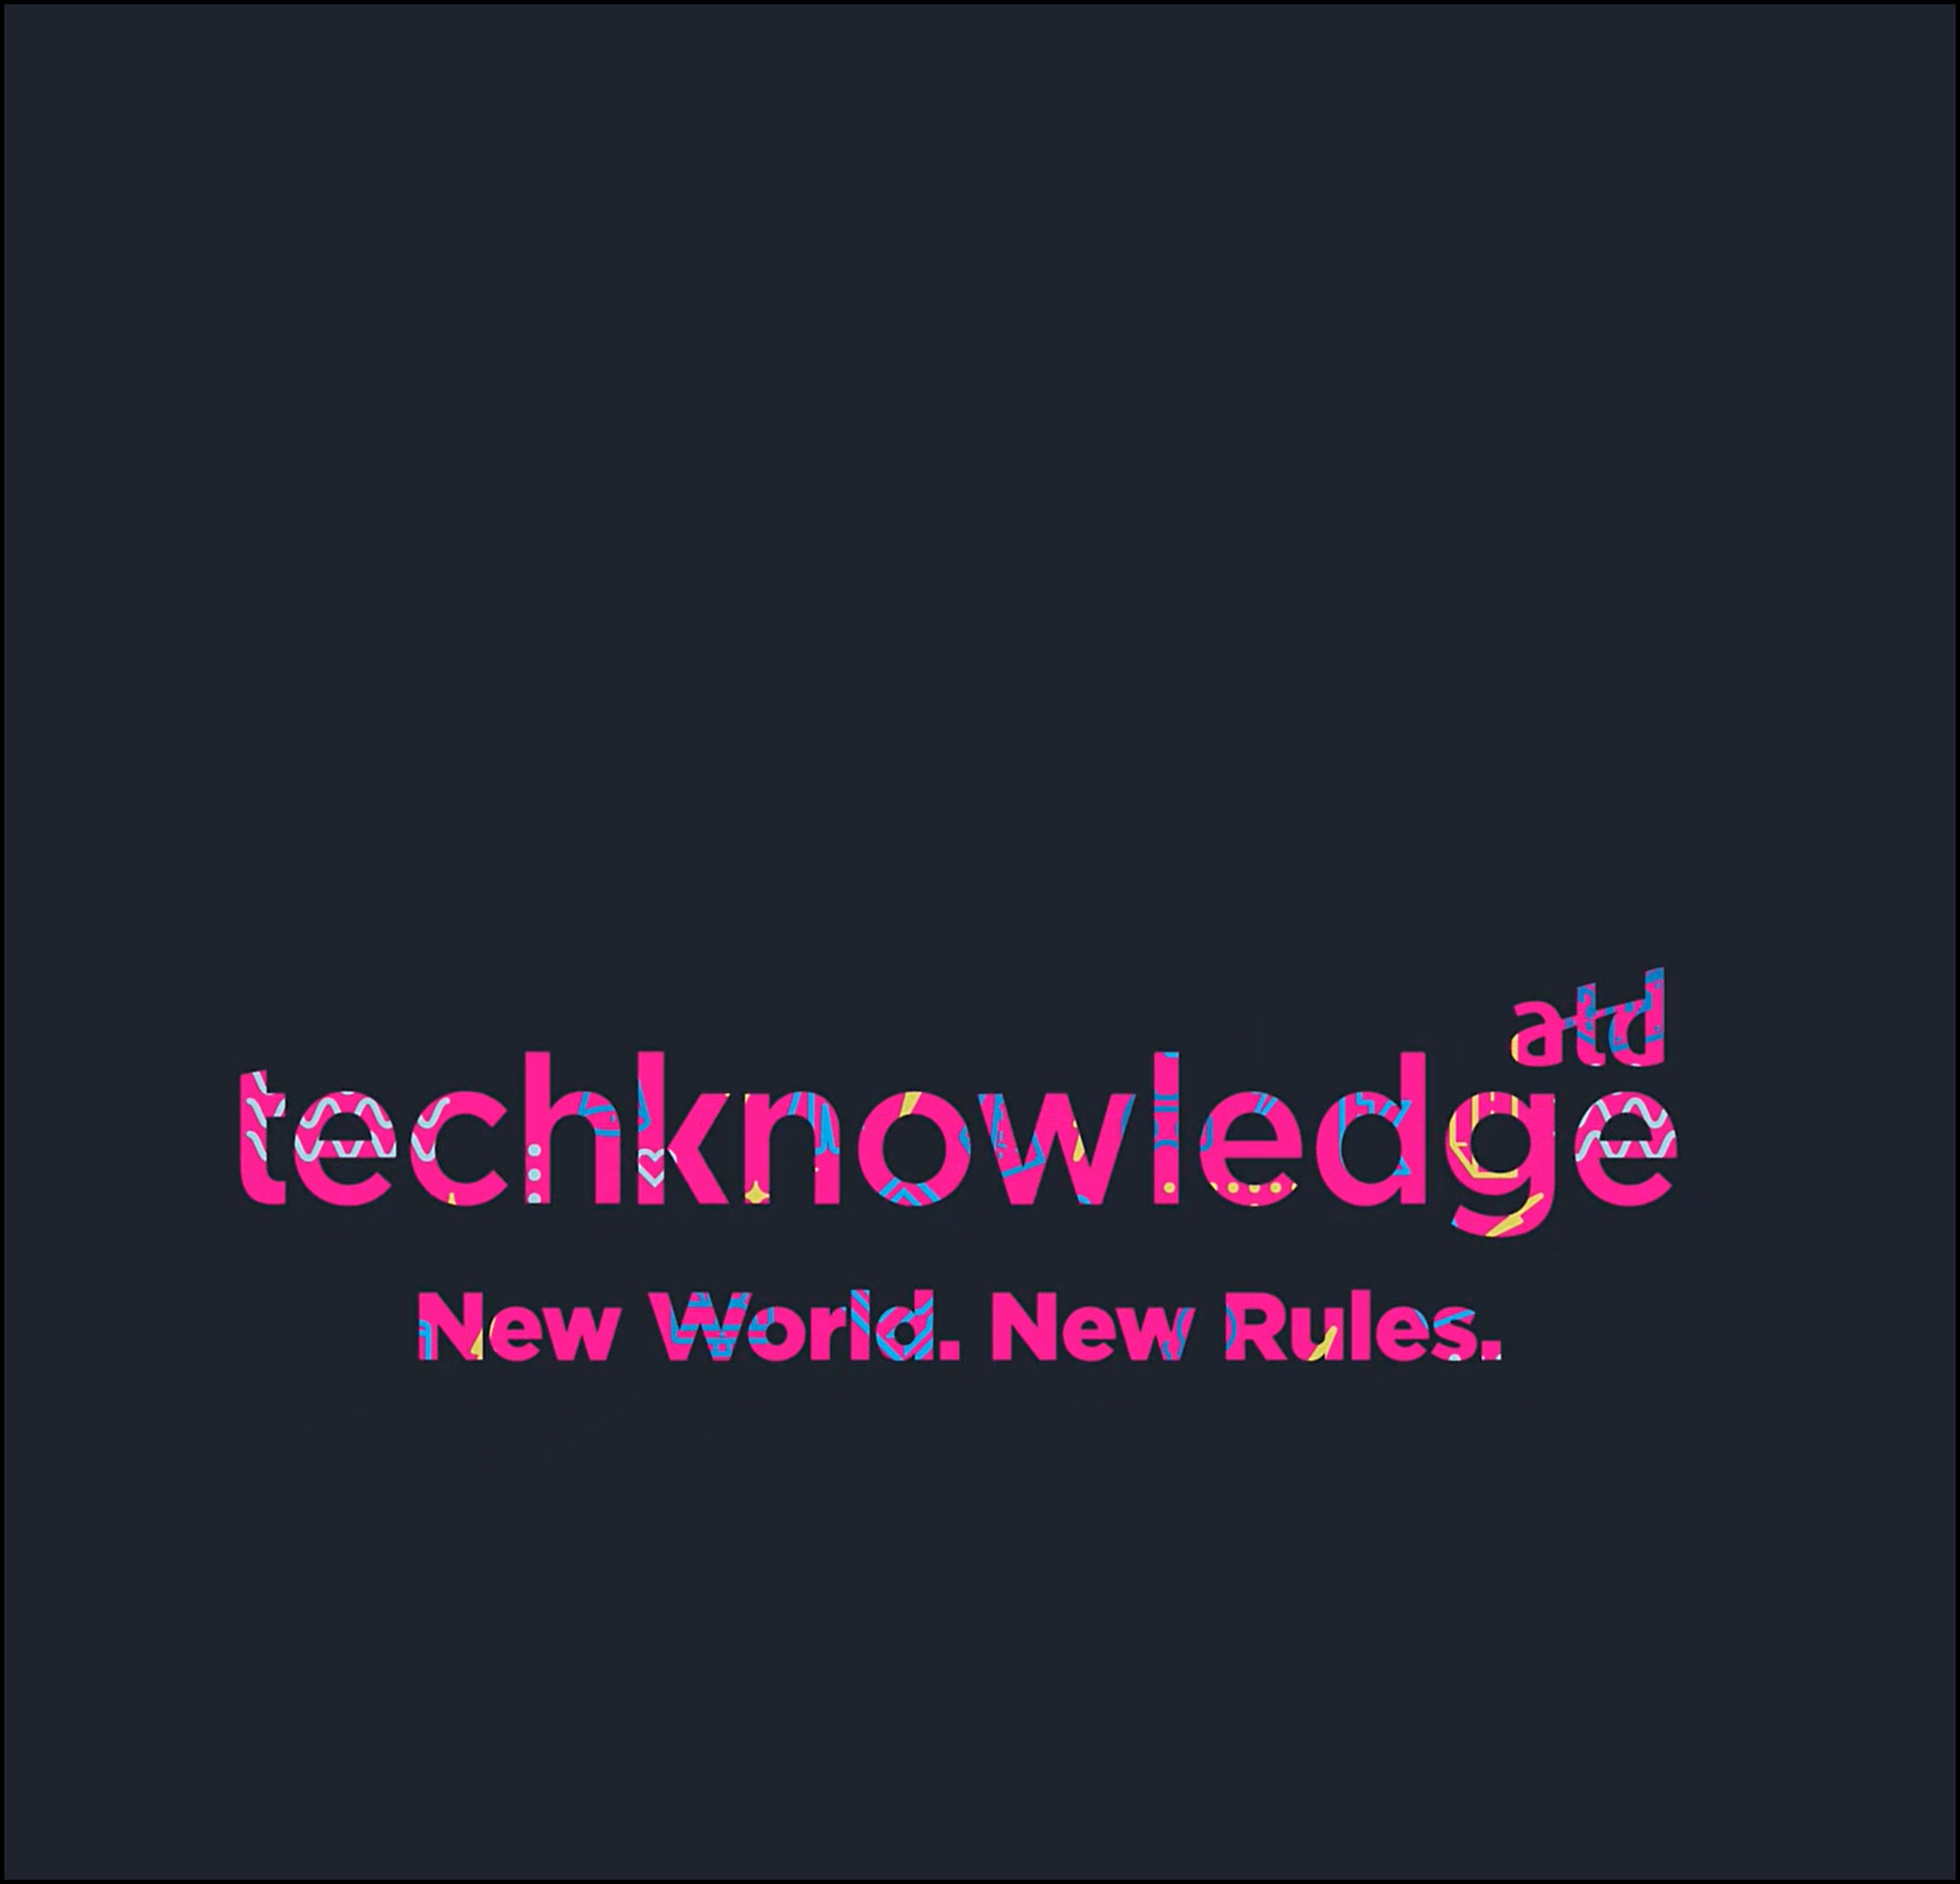 ATD Techknowledge features Connect the Dots and CVS presenting